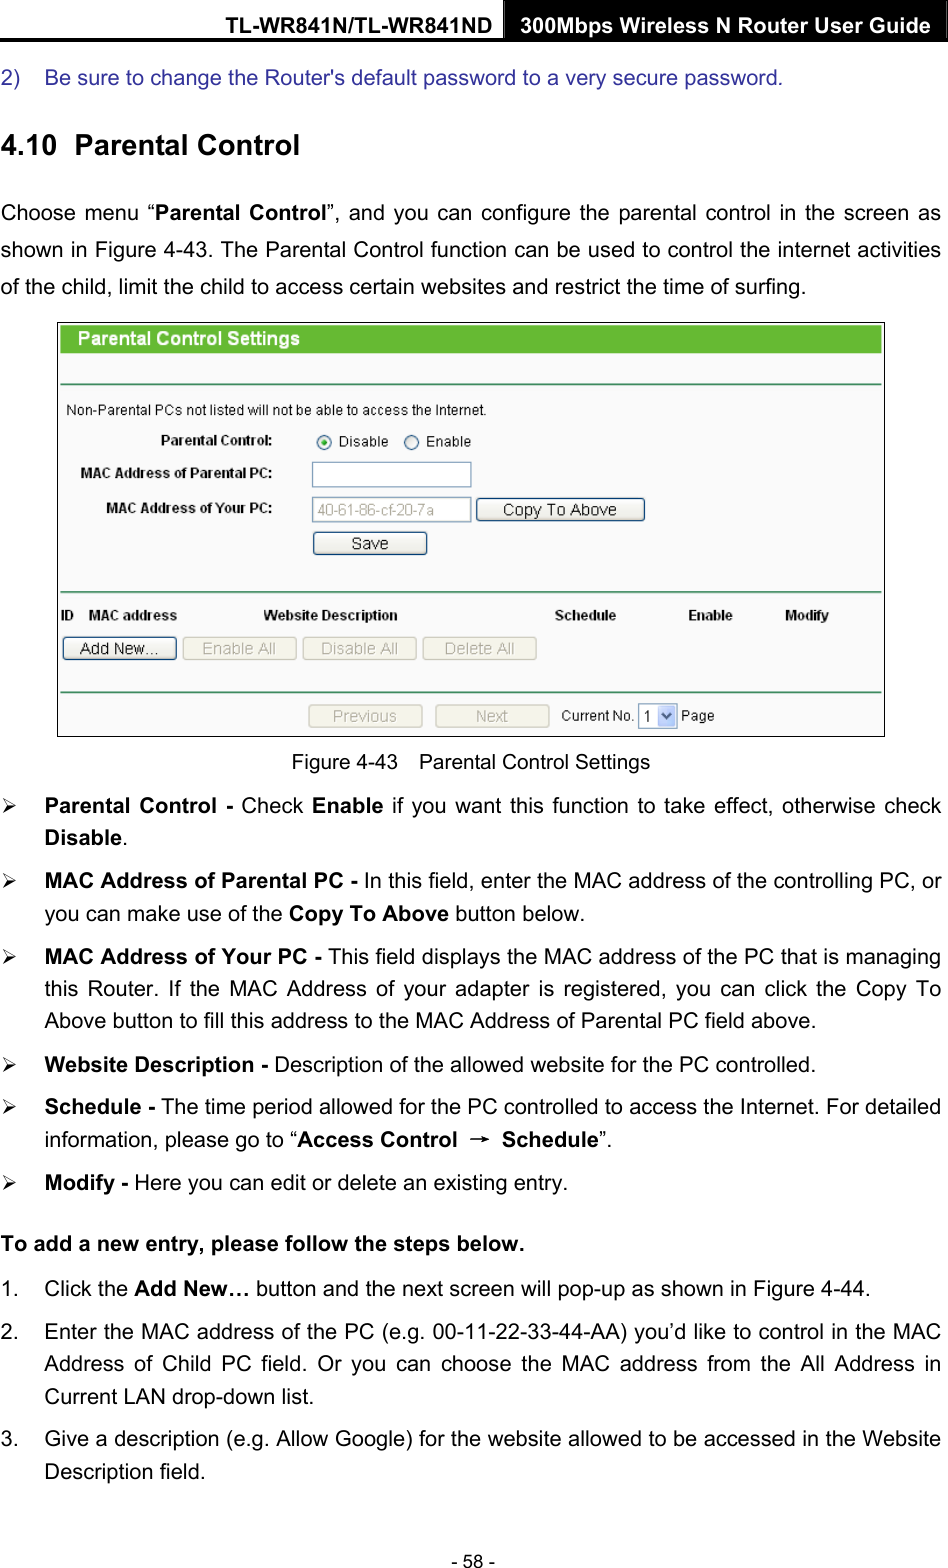 TL-WR841N/TL-WR841ND 300Mbps Wireless N Router User Guide - 58 - 2)  Be sure to change the Router&apos;s default password to a very secure password. 4.10   Parental Control Choose menu “Parental Control”, and you can configure the parental control in the screen as shown in Figure 4-43. The Parental Control function can be used to control the internet activities of the child, limit the child to access certain websites and restrict the time of surfing.  Figure 4-43    Parental Control Settings ¾ Parental Control - Check Enable if you want this function to take effect, otherwise check Disable.  ¾ MAC Address of Parental PC - In this field, enter the MAC address of the controlling PC, or you can make use of the Copy To Above button below.   ¾ MAC Address of Your PC - This field displays the MAC address of the PC that is managing this Router. If the MAC Address of your adapter is registered, you can click the Copy To Above button to fill this address to the MAC Address of Parental PC field above.   ¾ Website Description - Description of the allowed website for the PC controlled.   ¾ Schedule - The time period allowed for the PC controlled to access the Internet. For detailed information, please go to “Access Control  → Schedule”.  ¾ Modify - Here you can edit or delete an existing entry.   To add a new entry, please follow the steps below. 1. Click the Add New… button and the next screen will pop-up as shown in Figure 4-44. 2.  Enter the MAC address of the PC (e.g. 00-11-22-33-44-AA) you’d like to control in the MAC Address of Child PC field. Or you can choose the MAC address from the All Address in Current LAN drop-down list. 3.  Give a description (e.g. Allow Google) for the website allowed to be accessed in the Website Description field. 